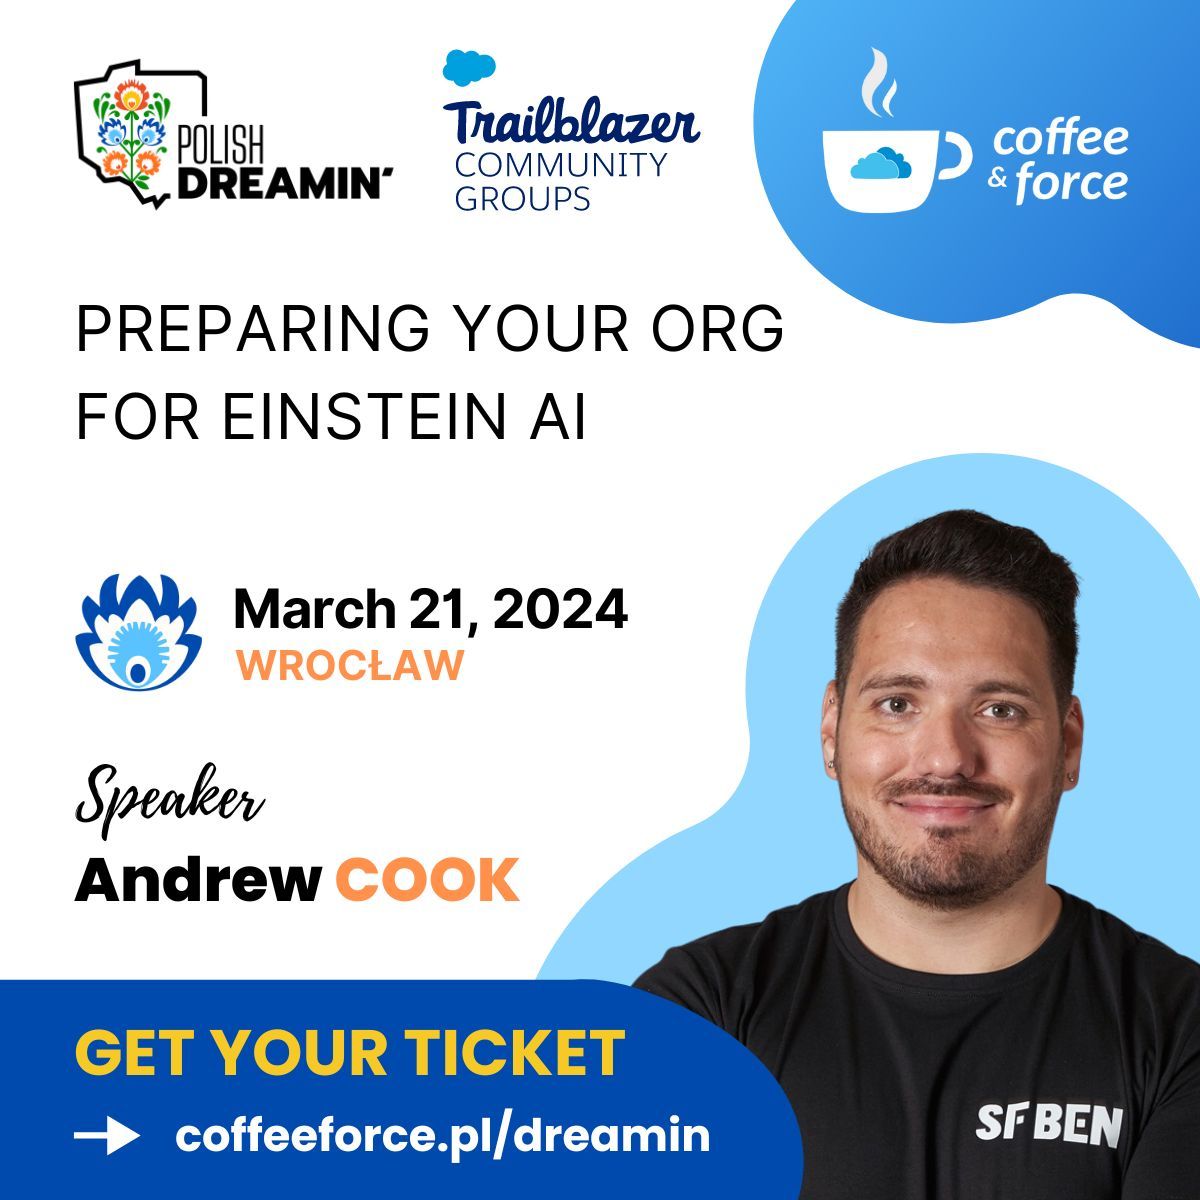 I'm so excited for this, just 3 weeks until the first #PolishDreamin where I'll be presenting on Preparing Your Org for Einstein AI! buff.ly/3I8e46f